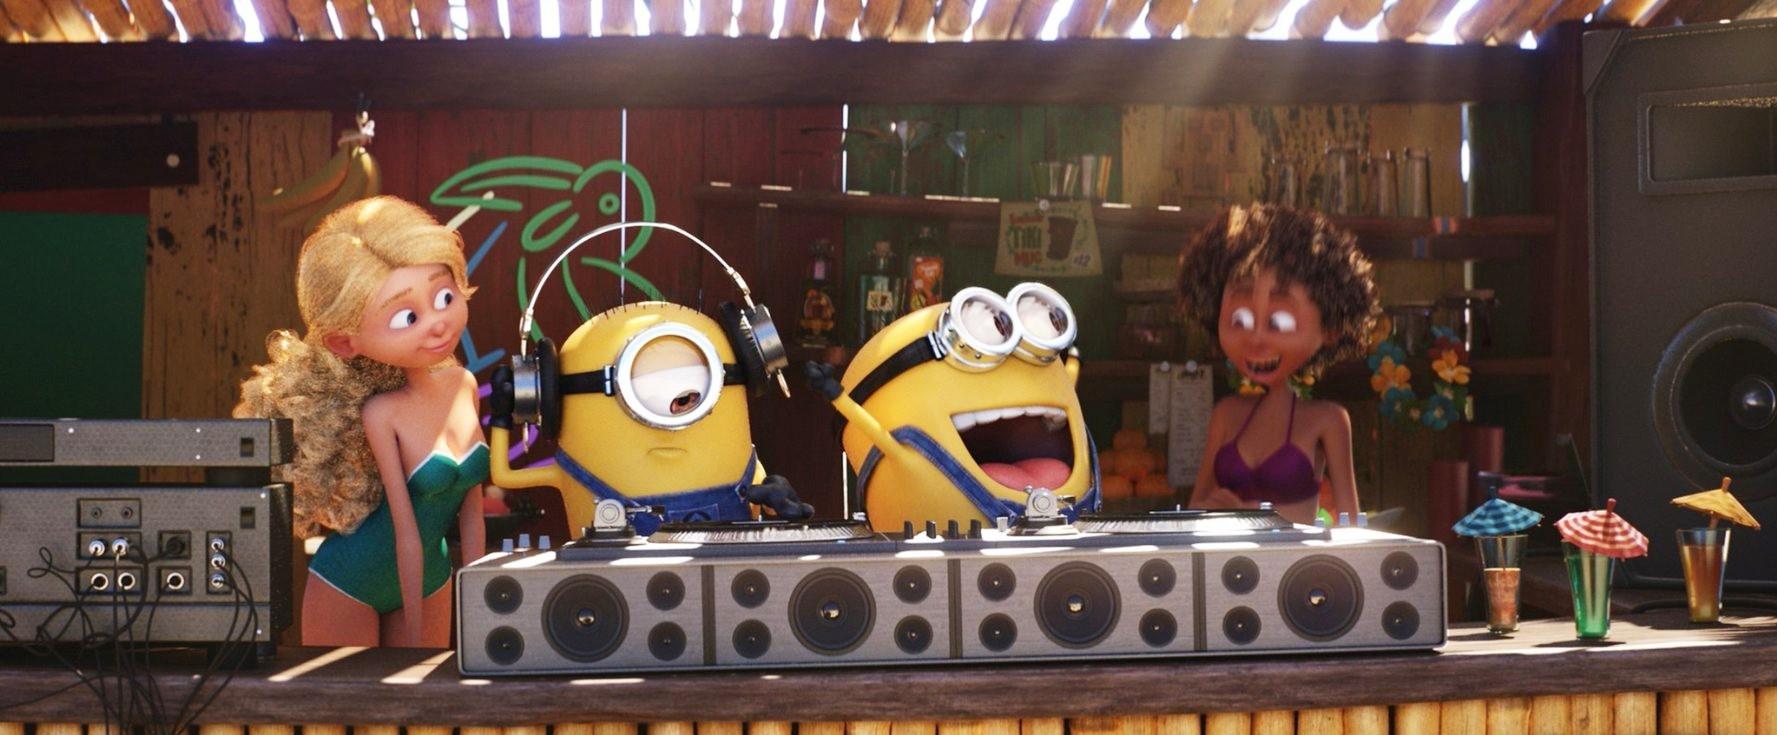 Minions from Universal Pictures' Despicable Me 3 (2017)